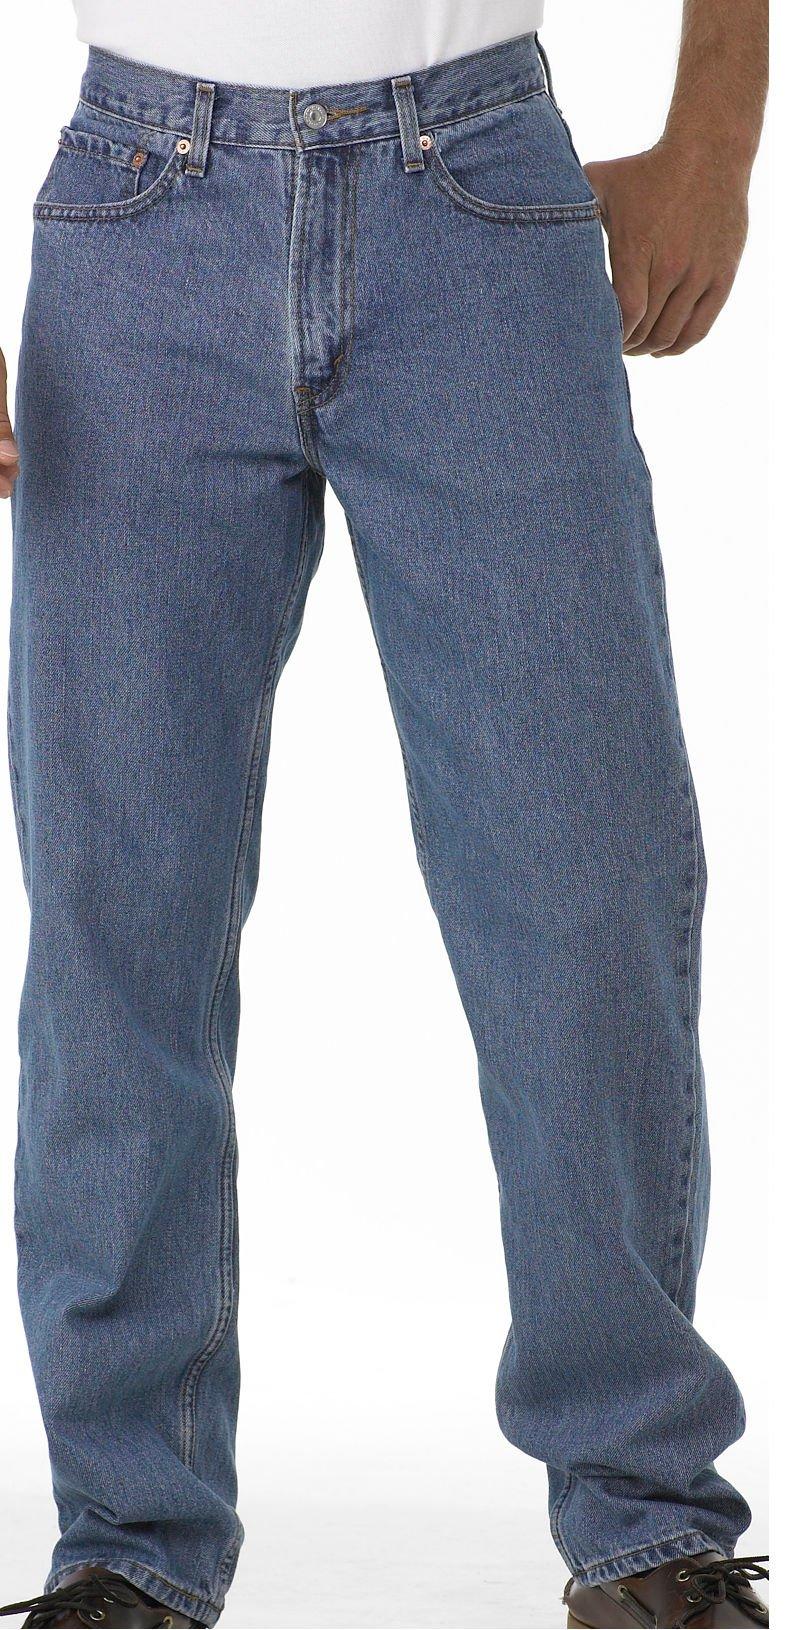 levi's men's 550 relaxed fit jeans